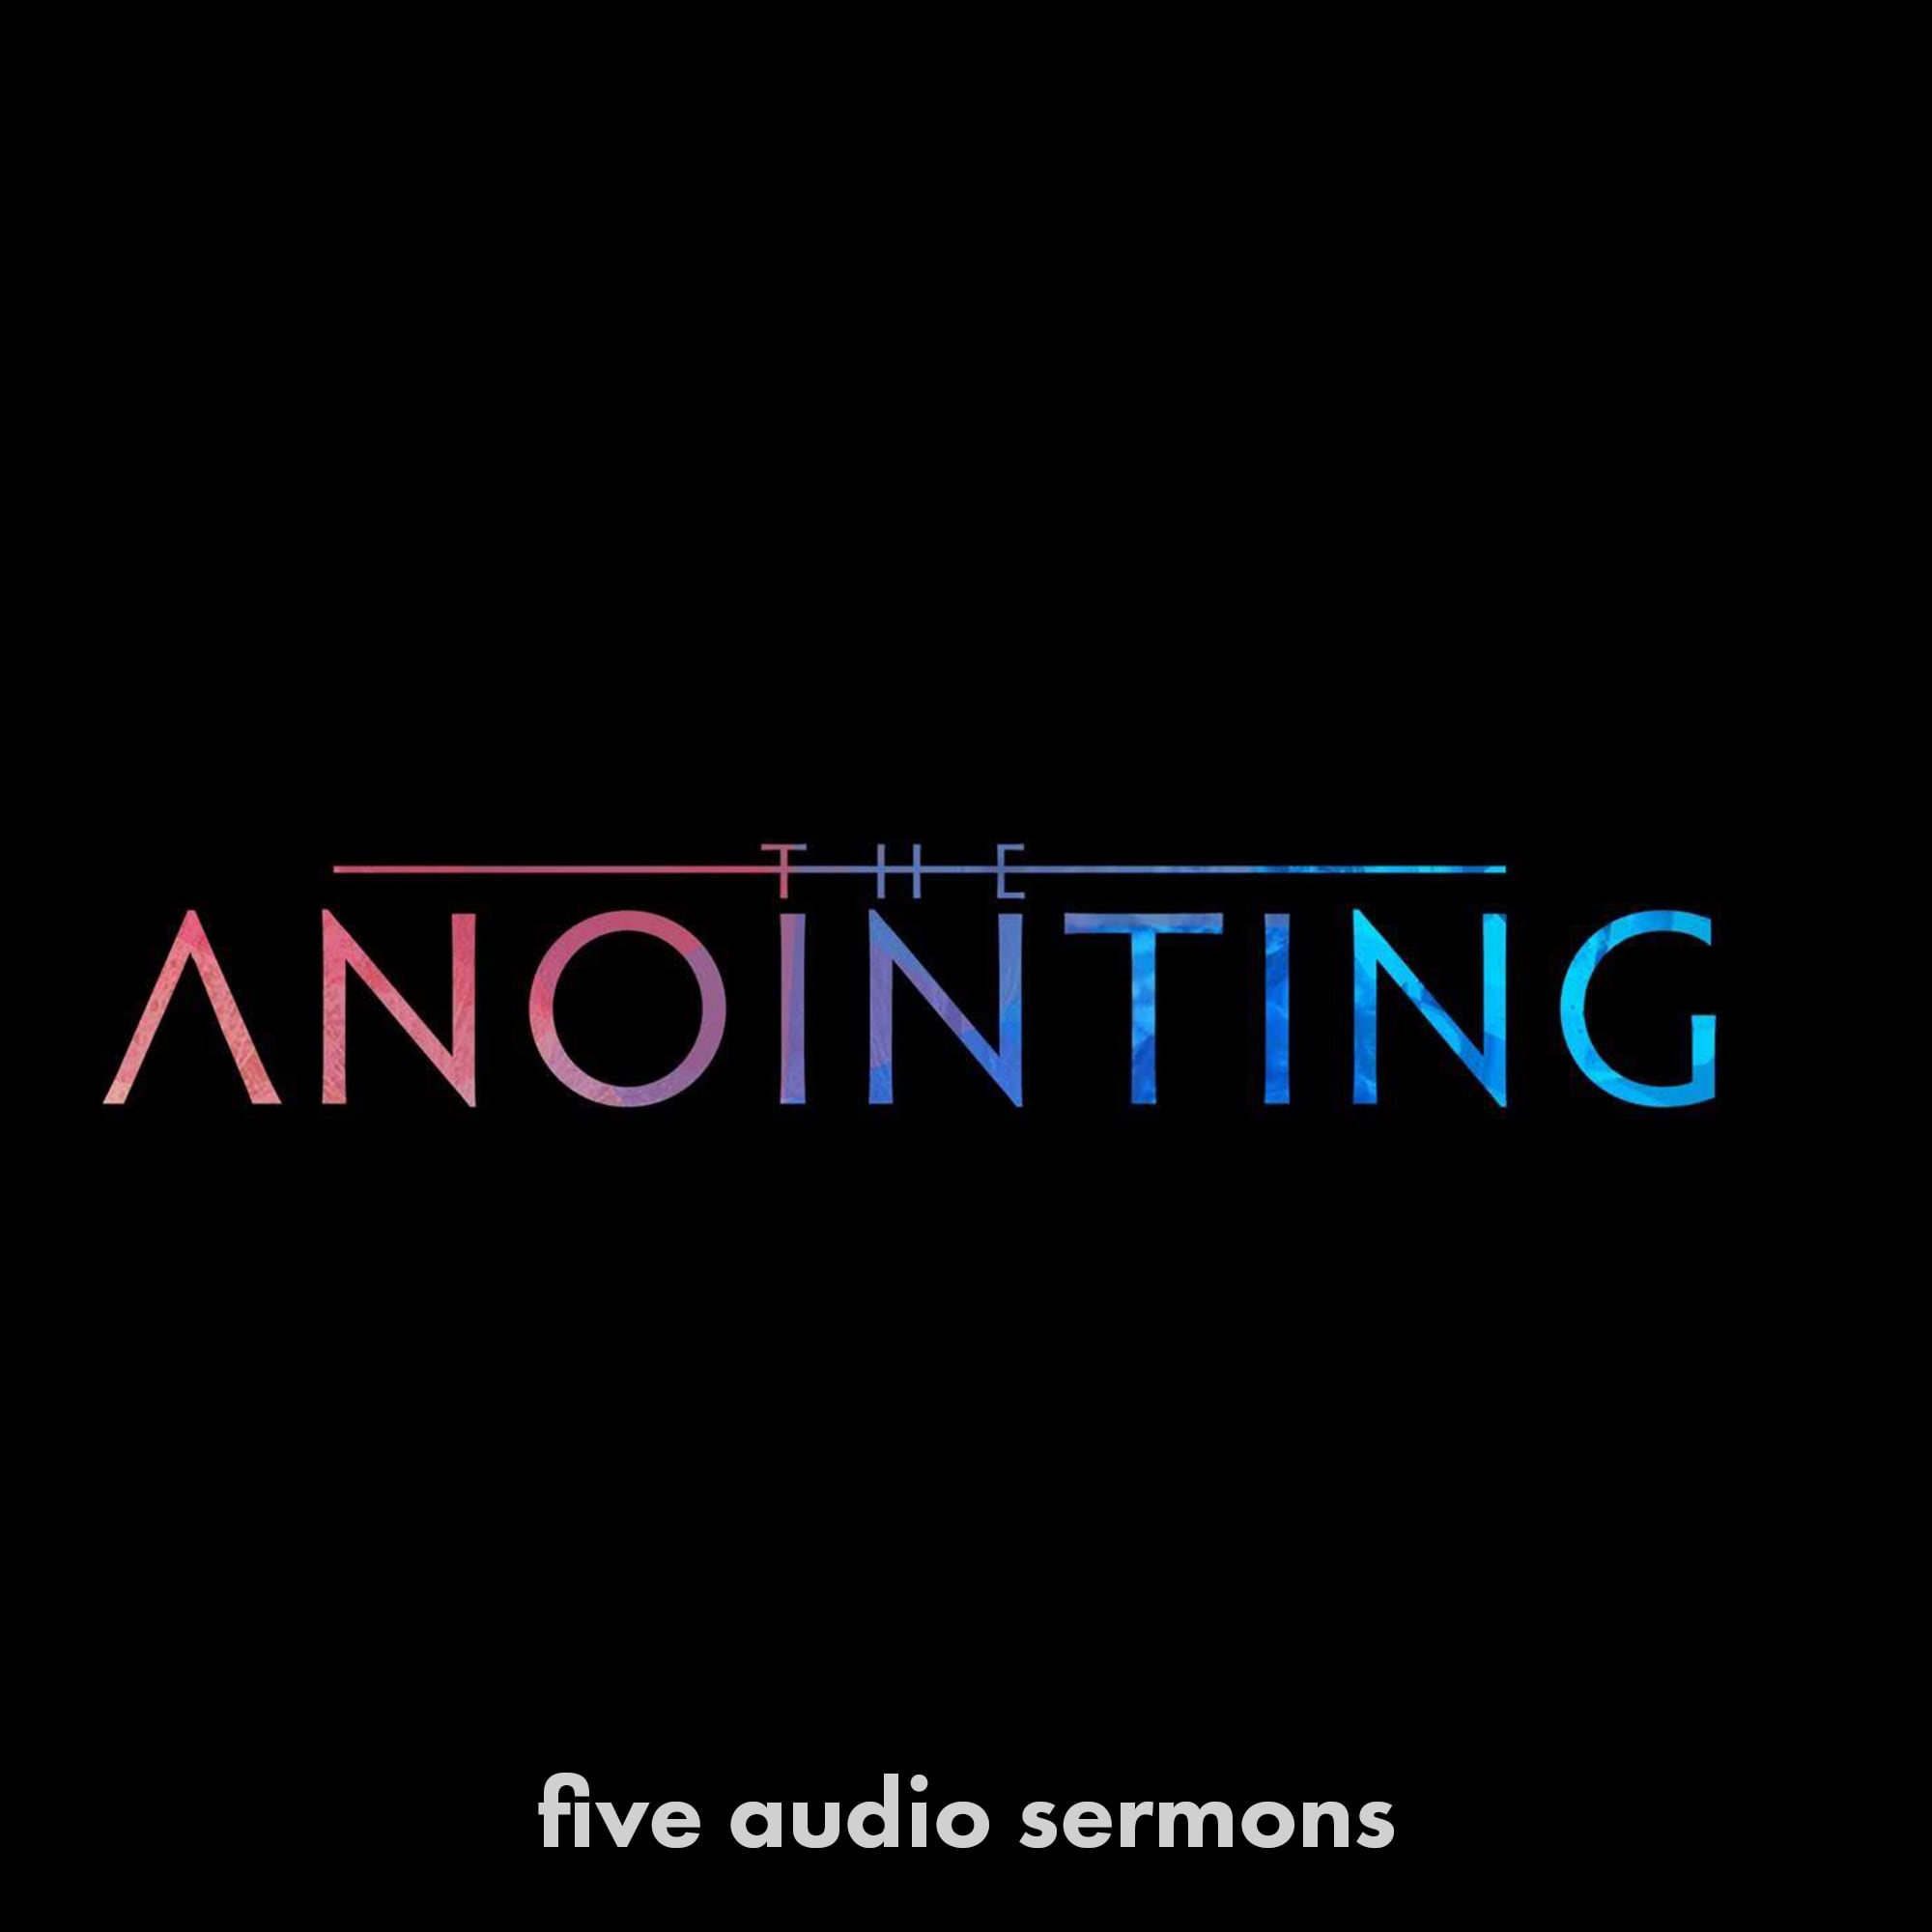 Series: Anointing